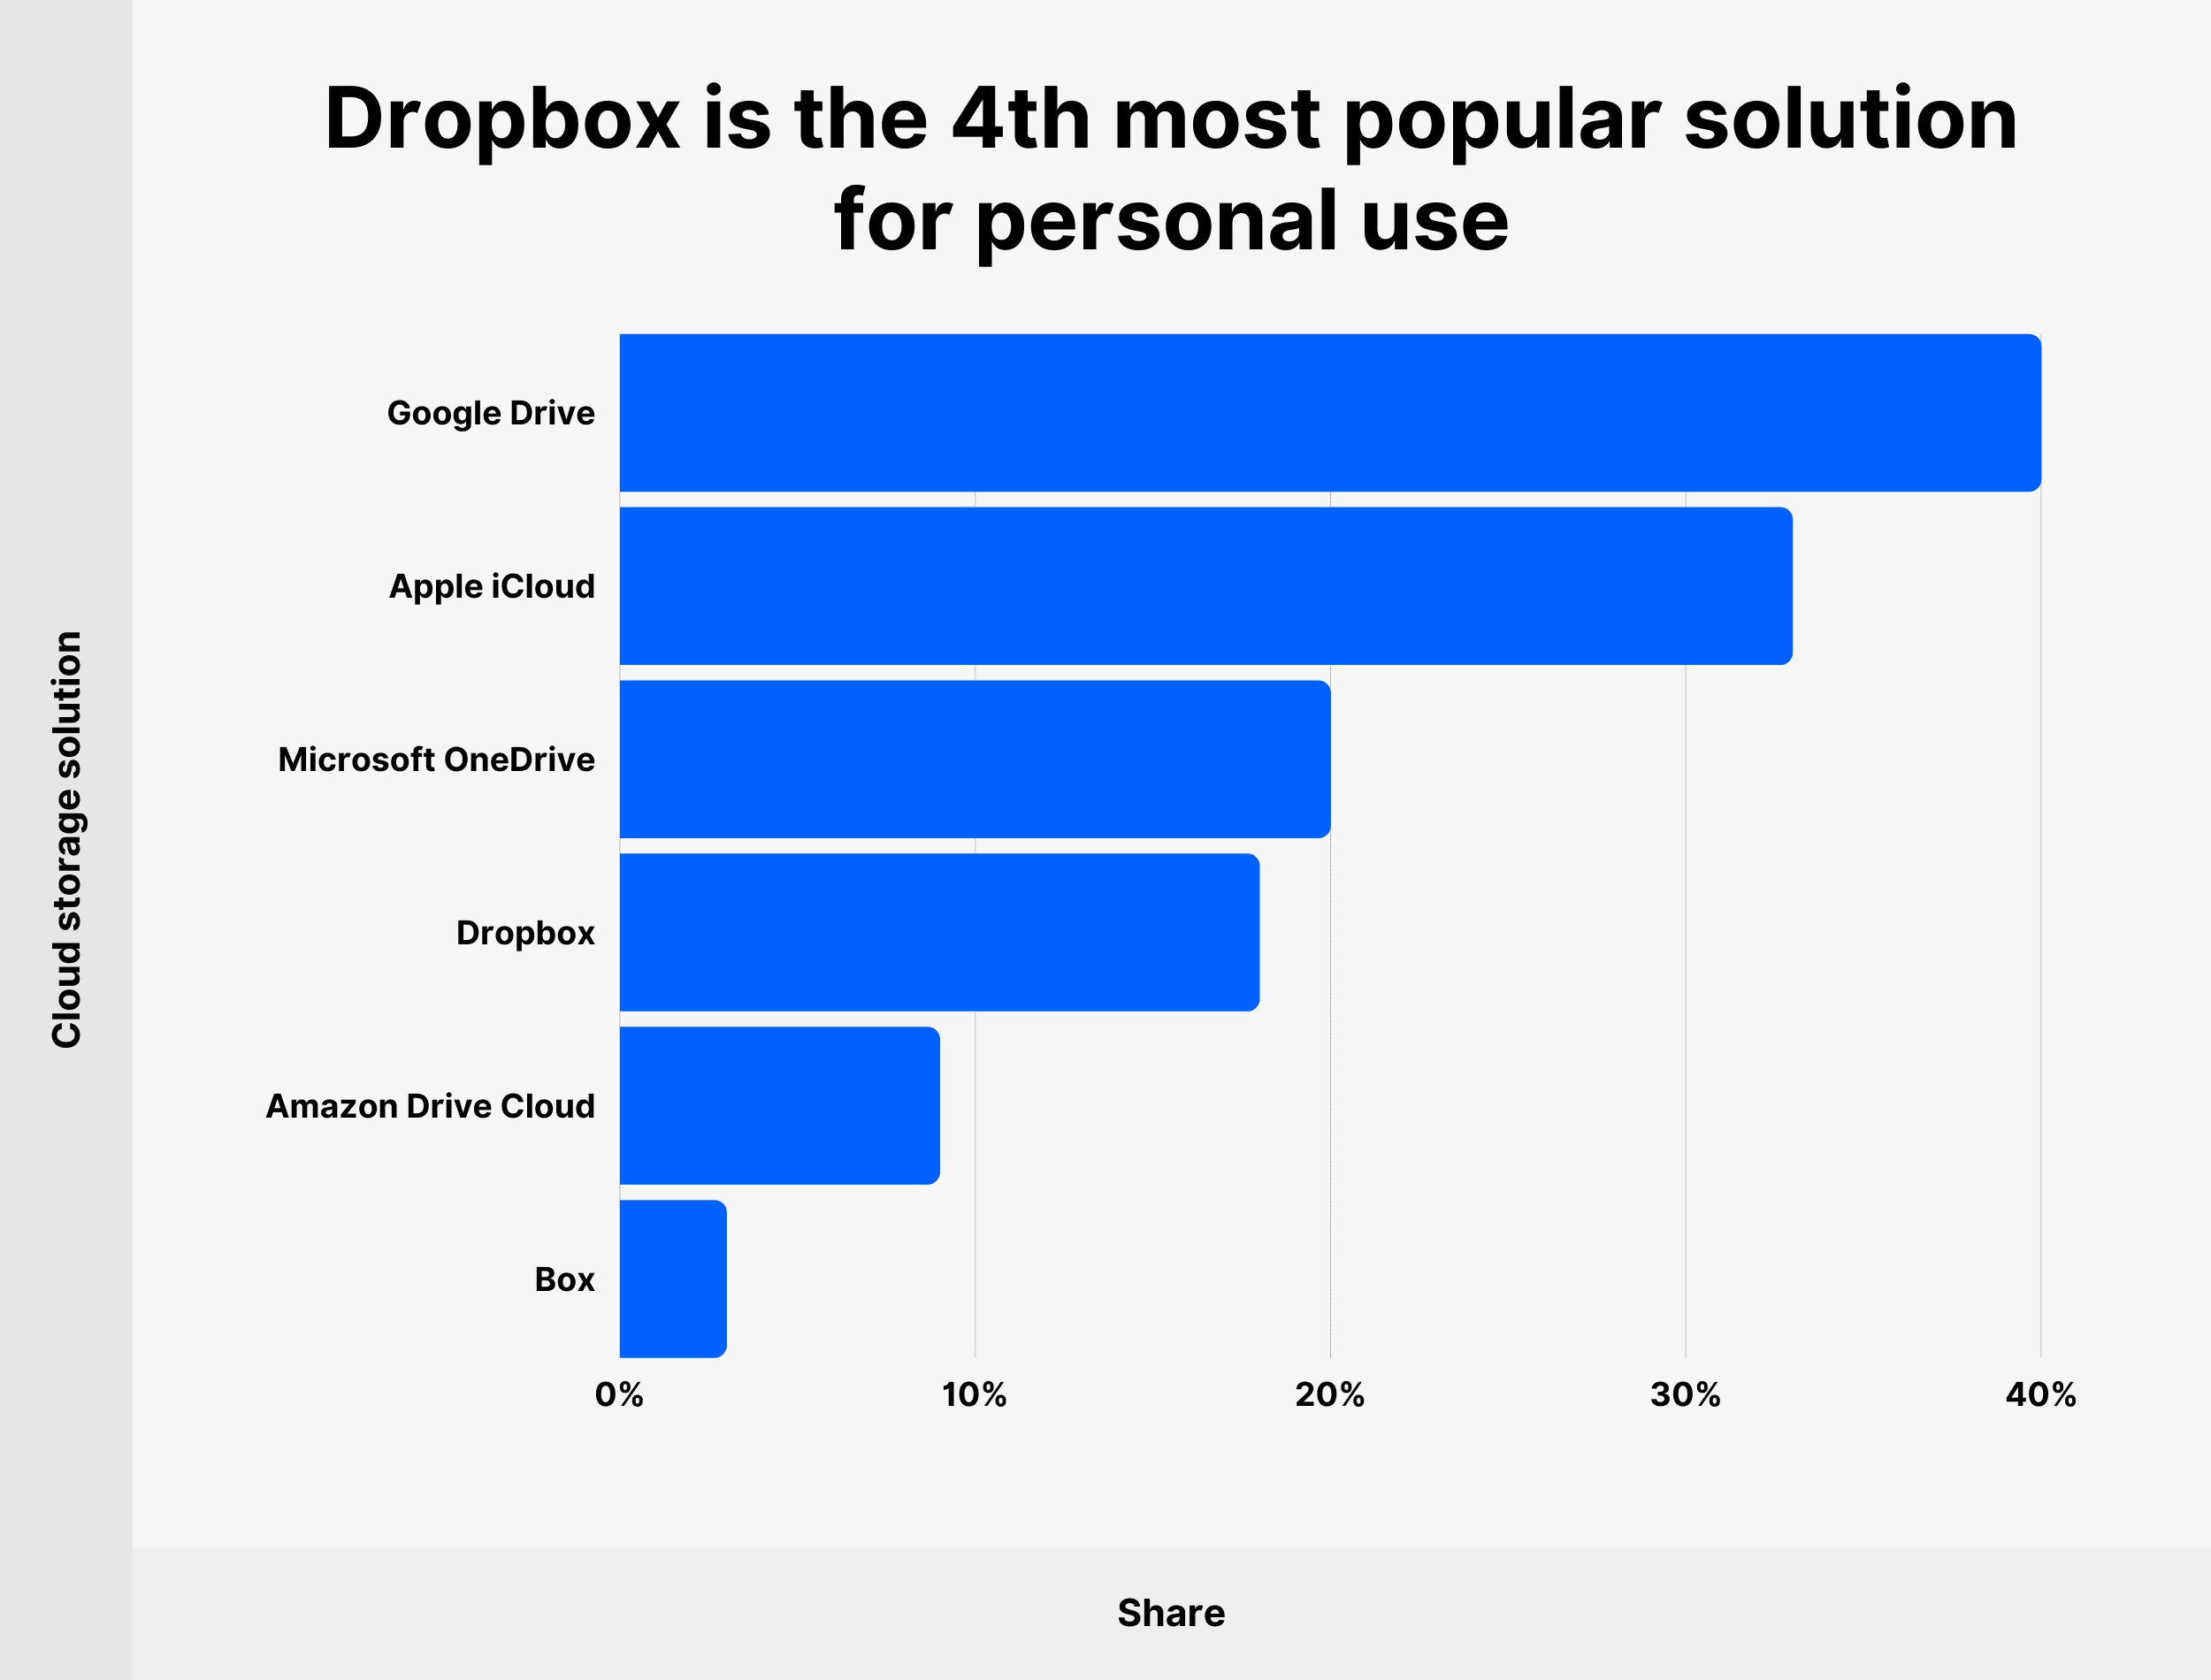 Dropbox is the 4th most popular solution for personal use